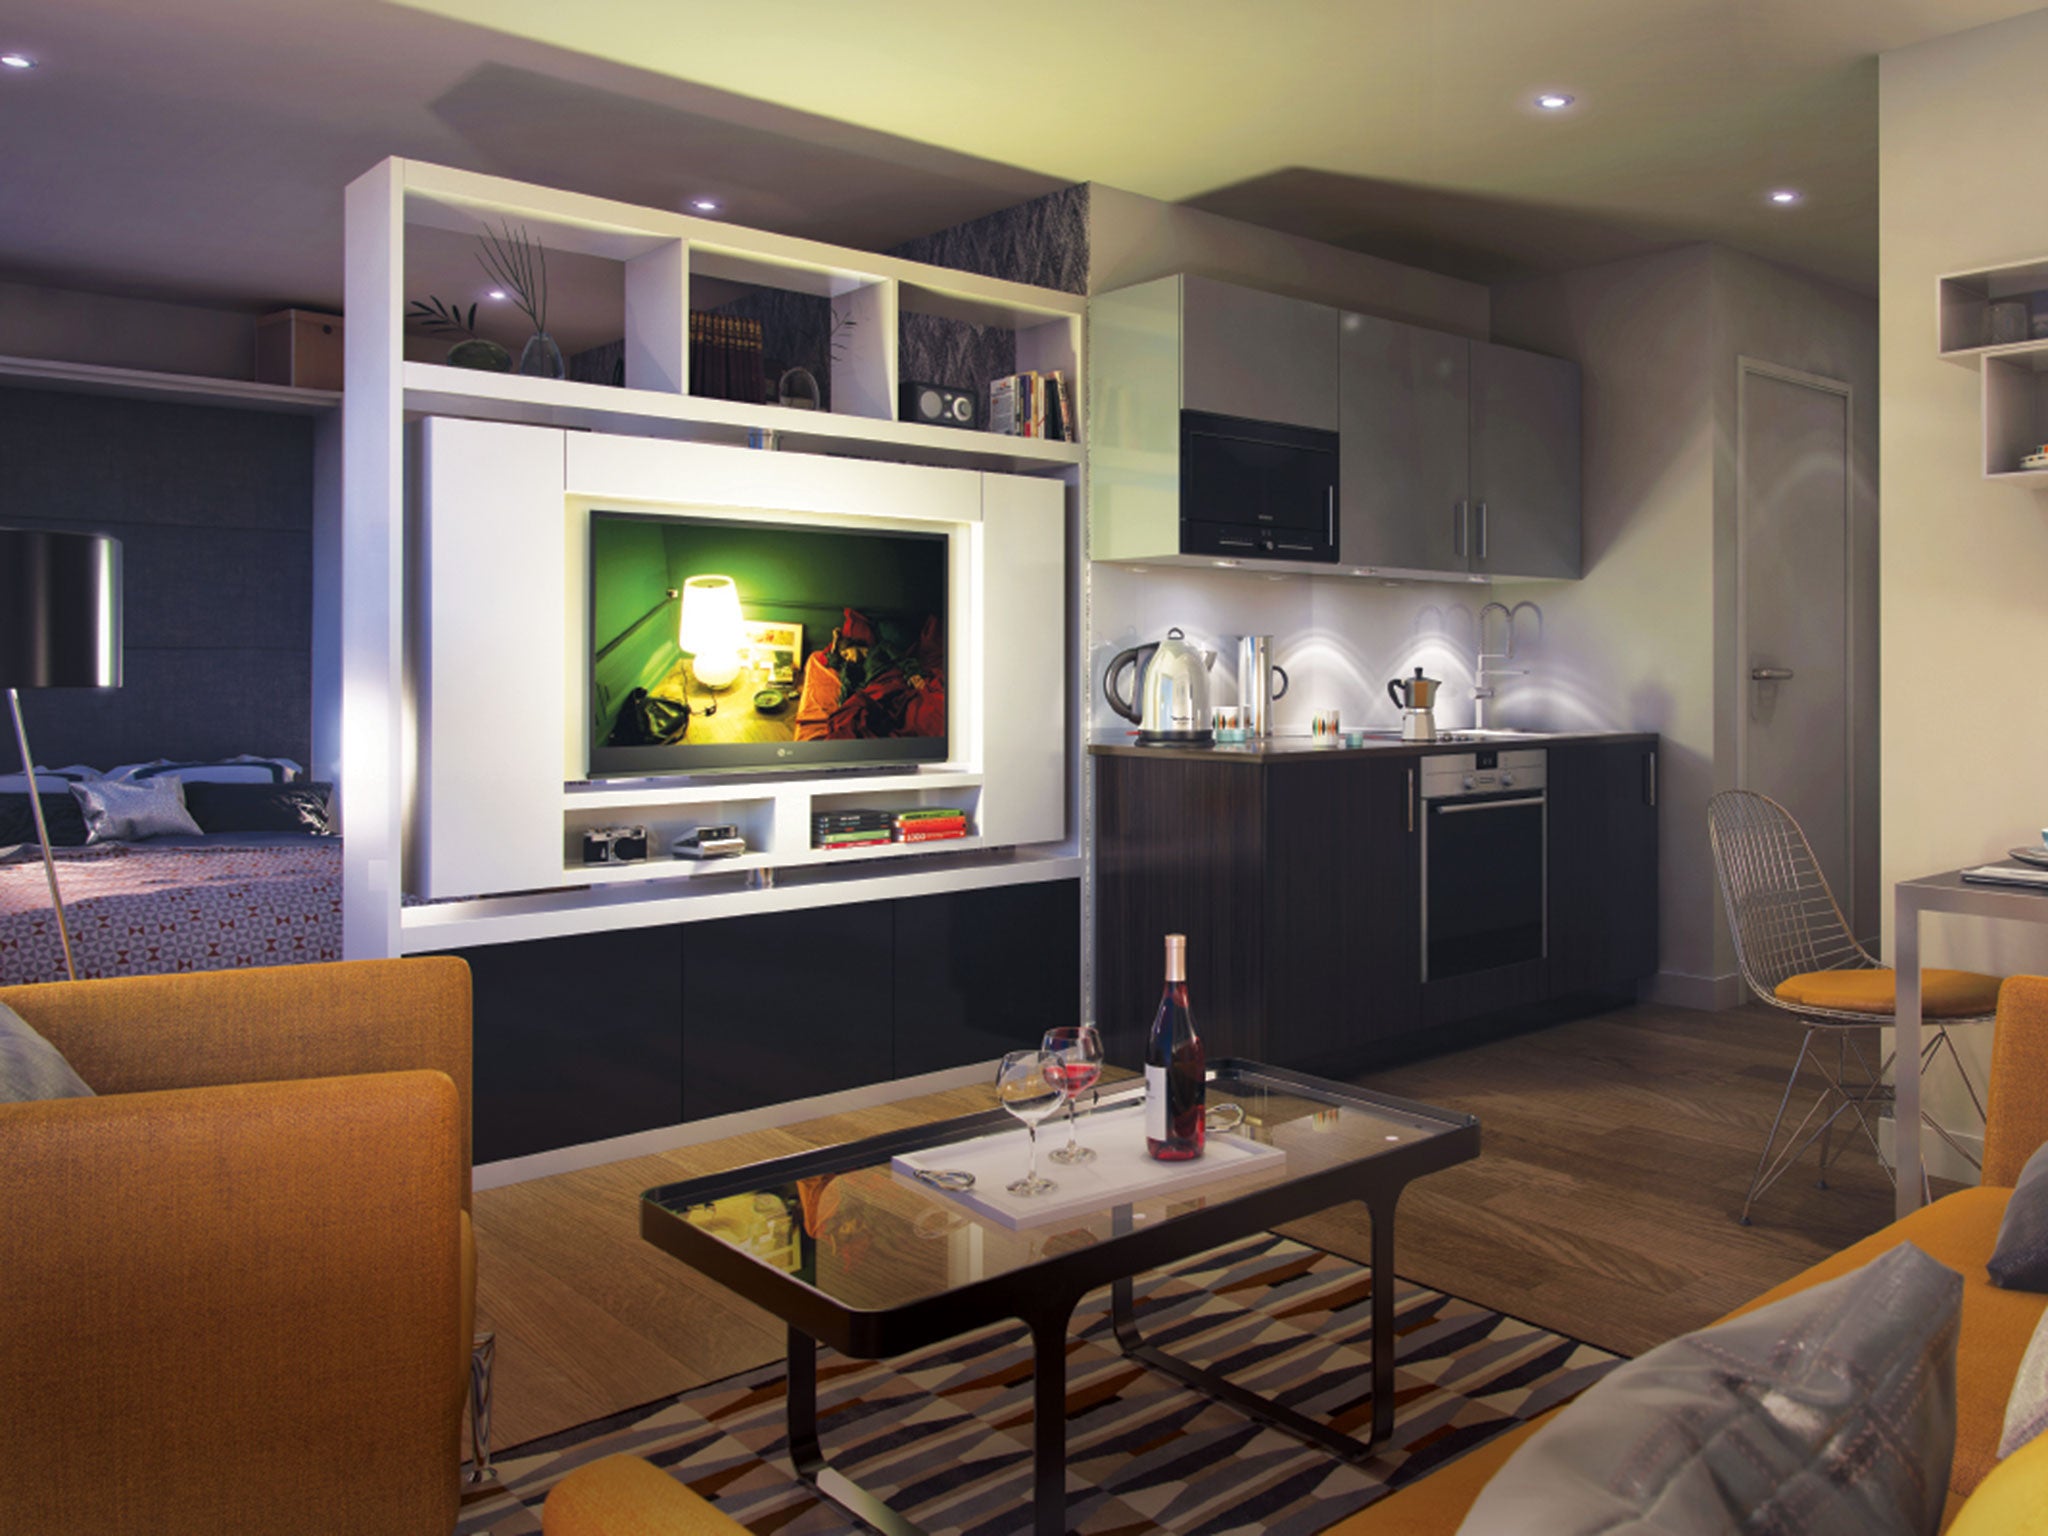 To maximise space Galliard Homes have designed swivel television units and shelving which cleverly divide the open-plan living and sleeping areas in all the studio apartments and some of the one bedroom apartments.